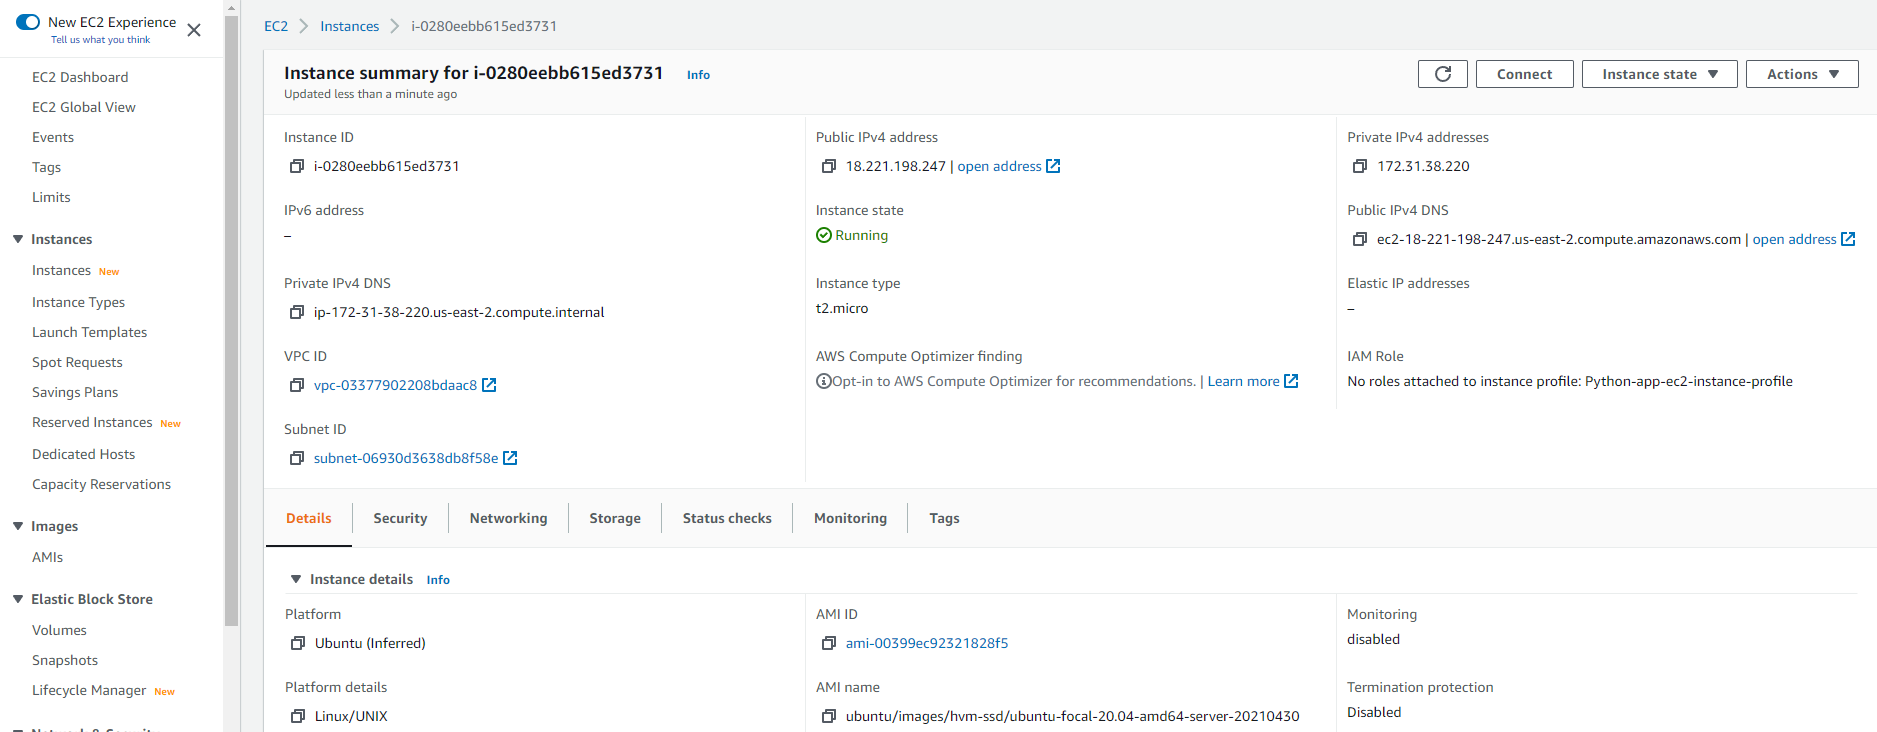 Viewing the summary of the EC2 instance